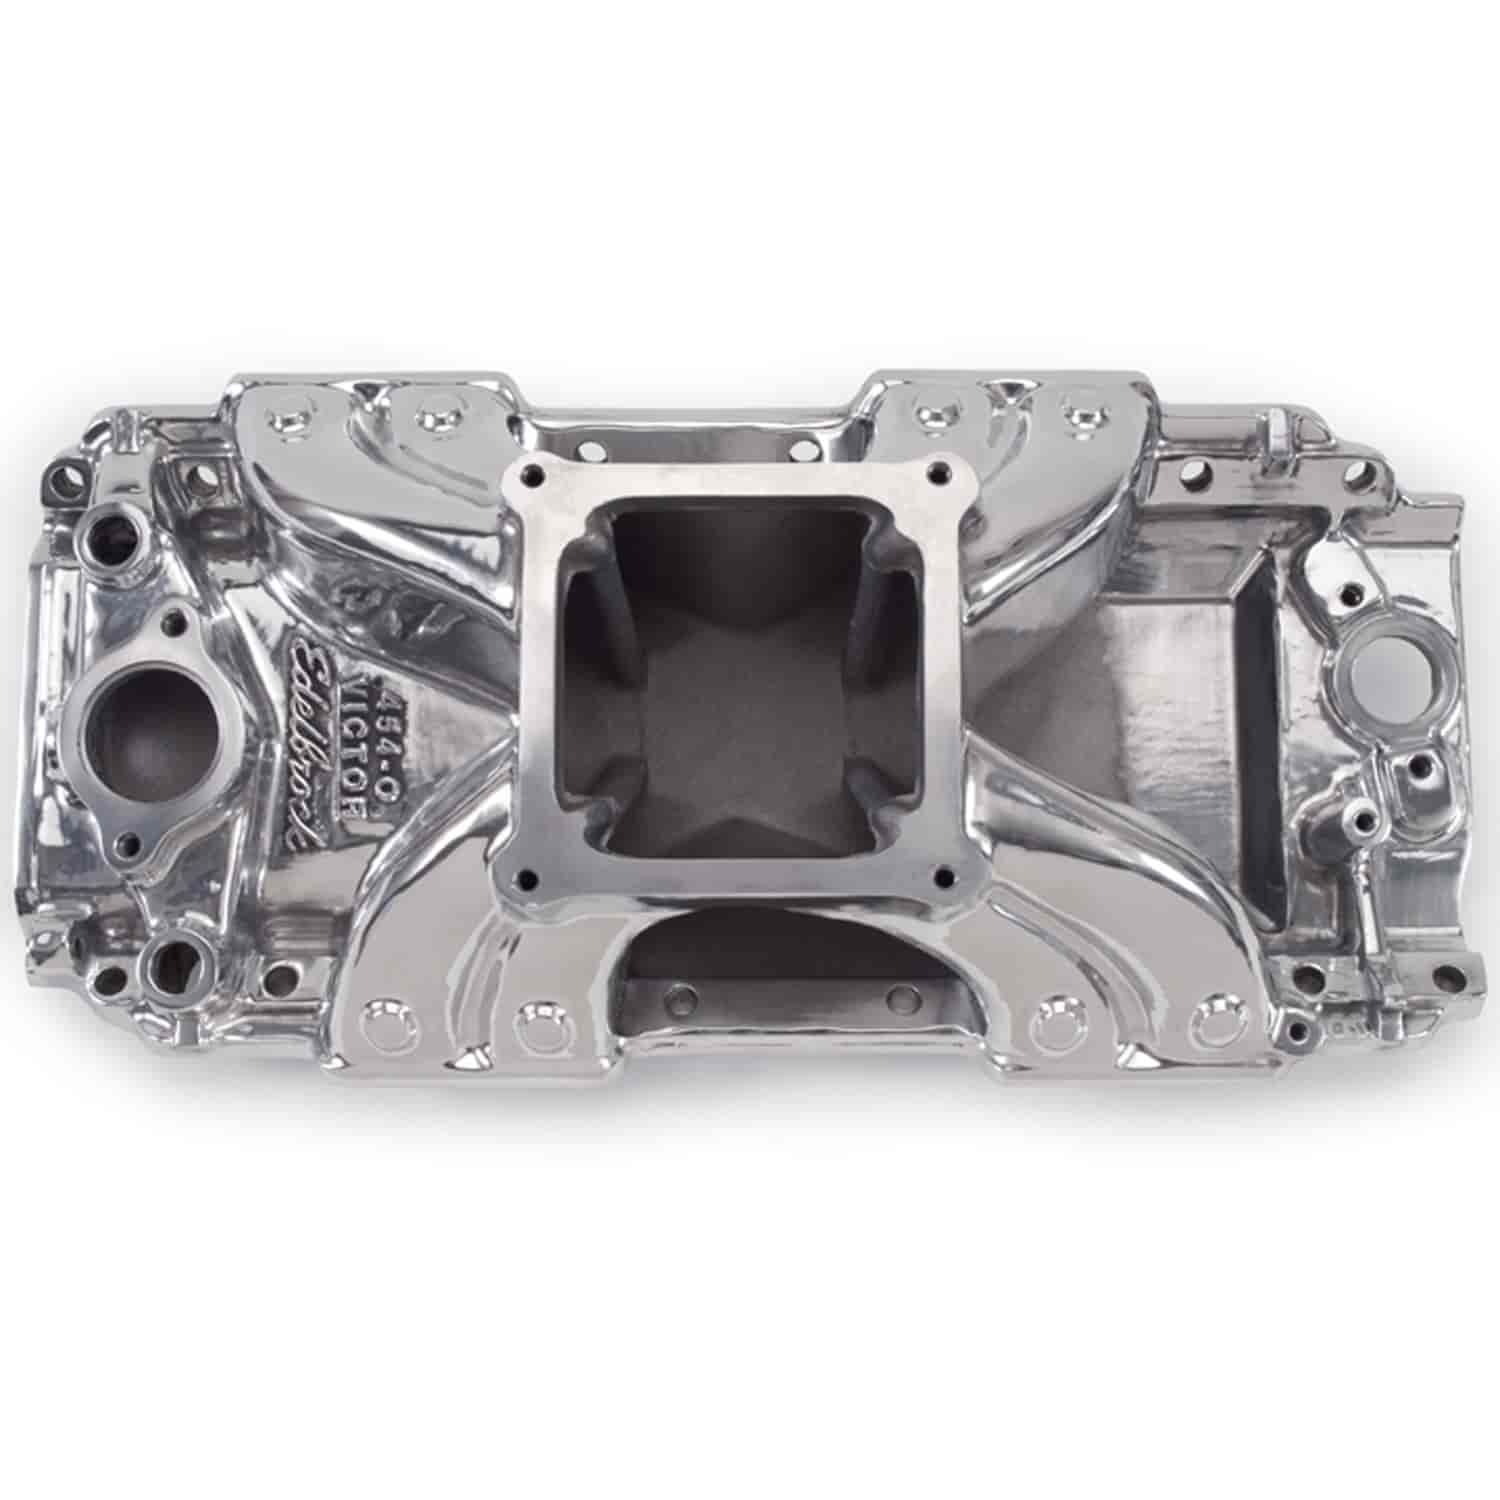 Victor 454-O Intake Manifold Big Block Chevy with 1975-Earlier large oval port heads